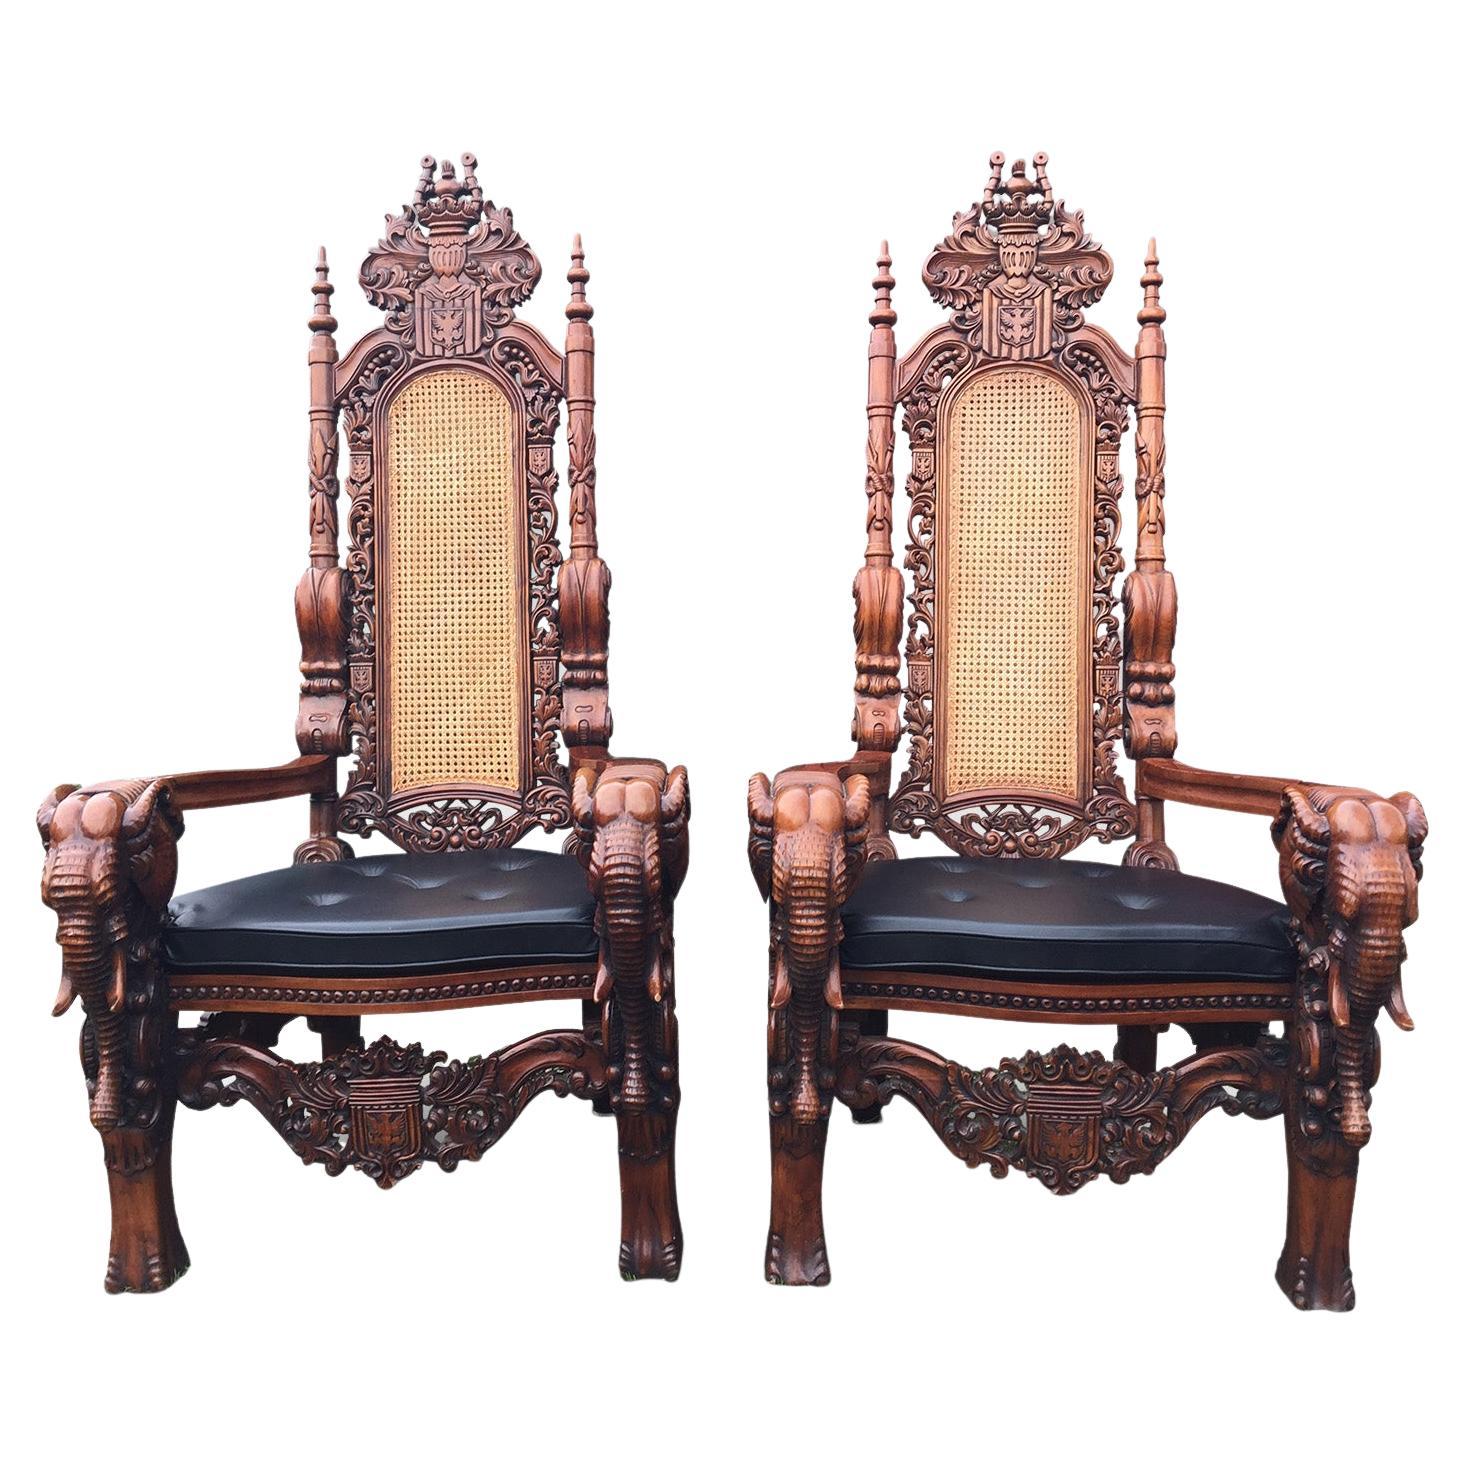 Antique Pair of Top Quality Large Pair of Carved Walnut Elephant Throne Chairs